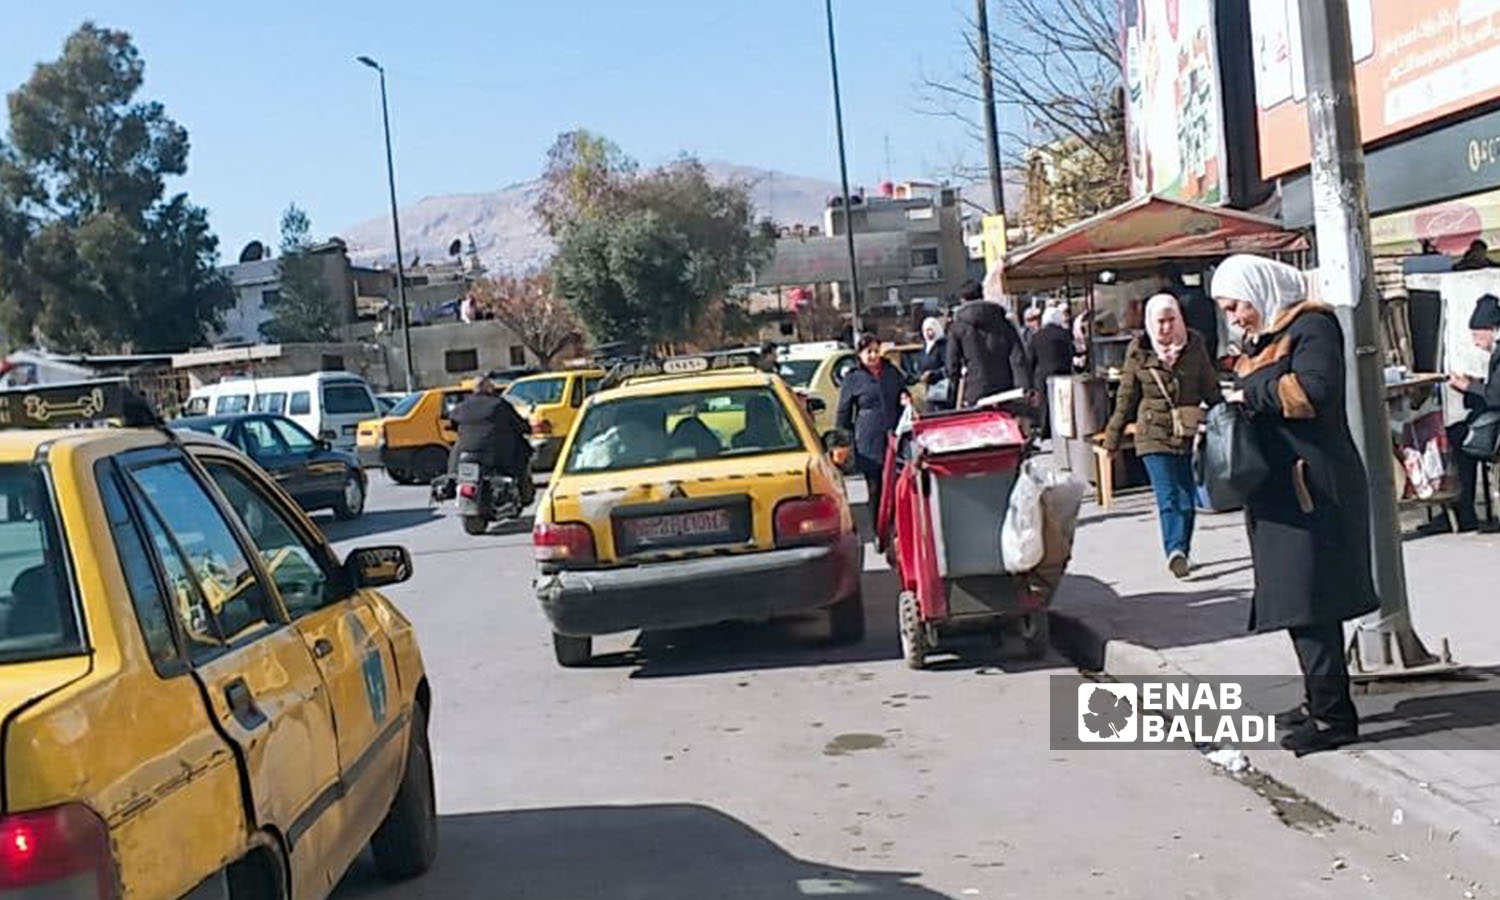 Overcrowding at Damascus streets during work hours - 20 February 2022 (Hassan Hassan / Enab Baladi)
